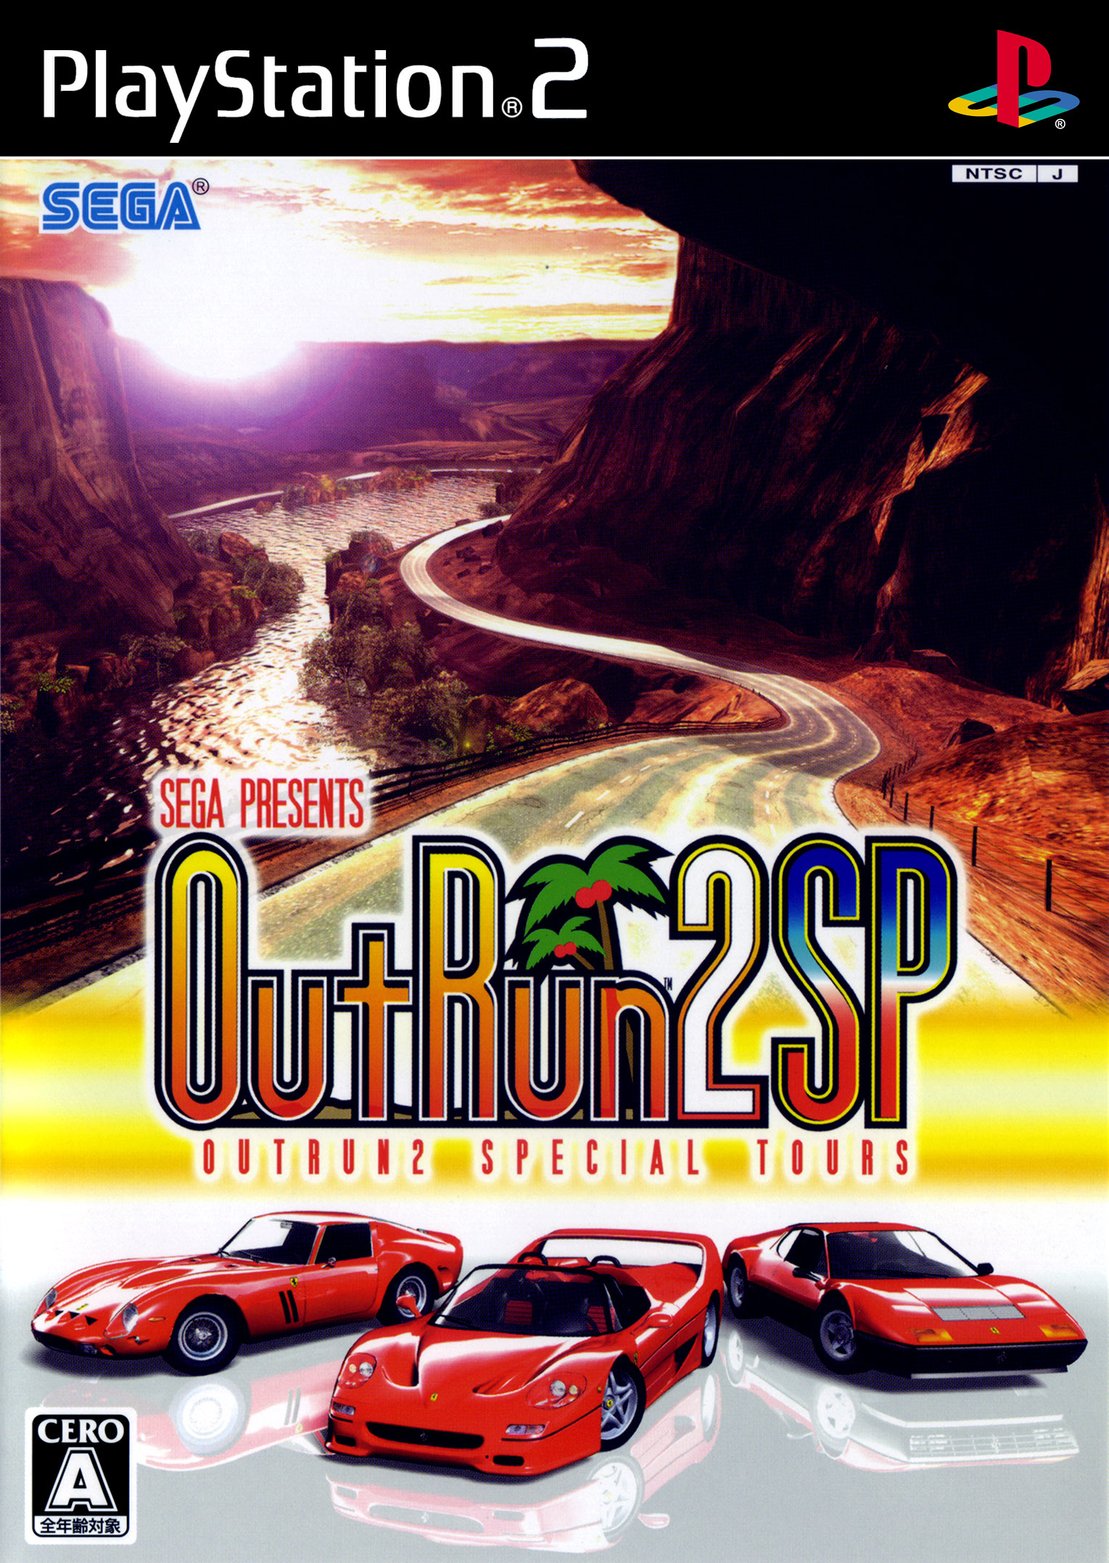 The coverart image of OutRun 2 SP